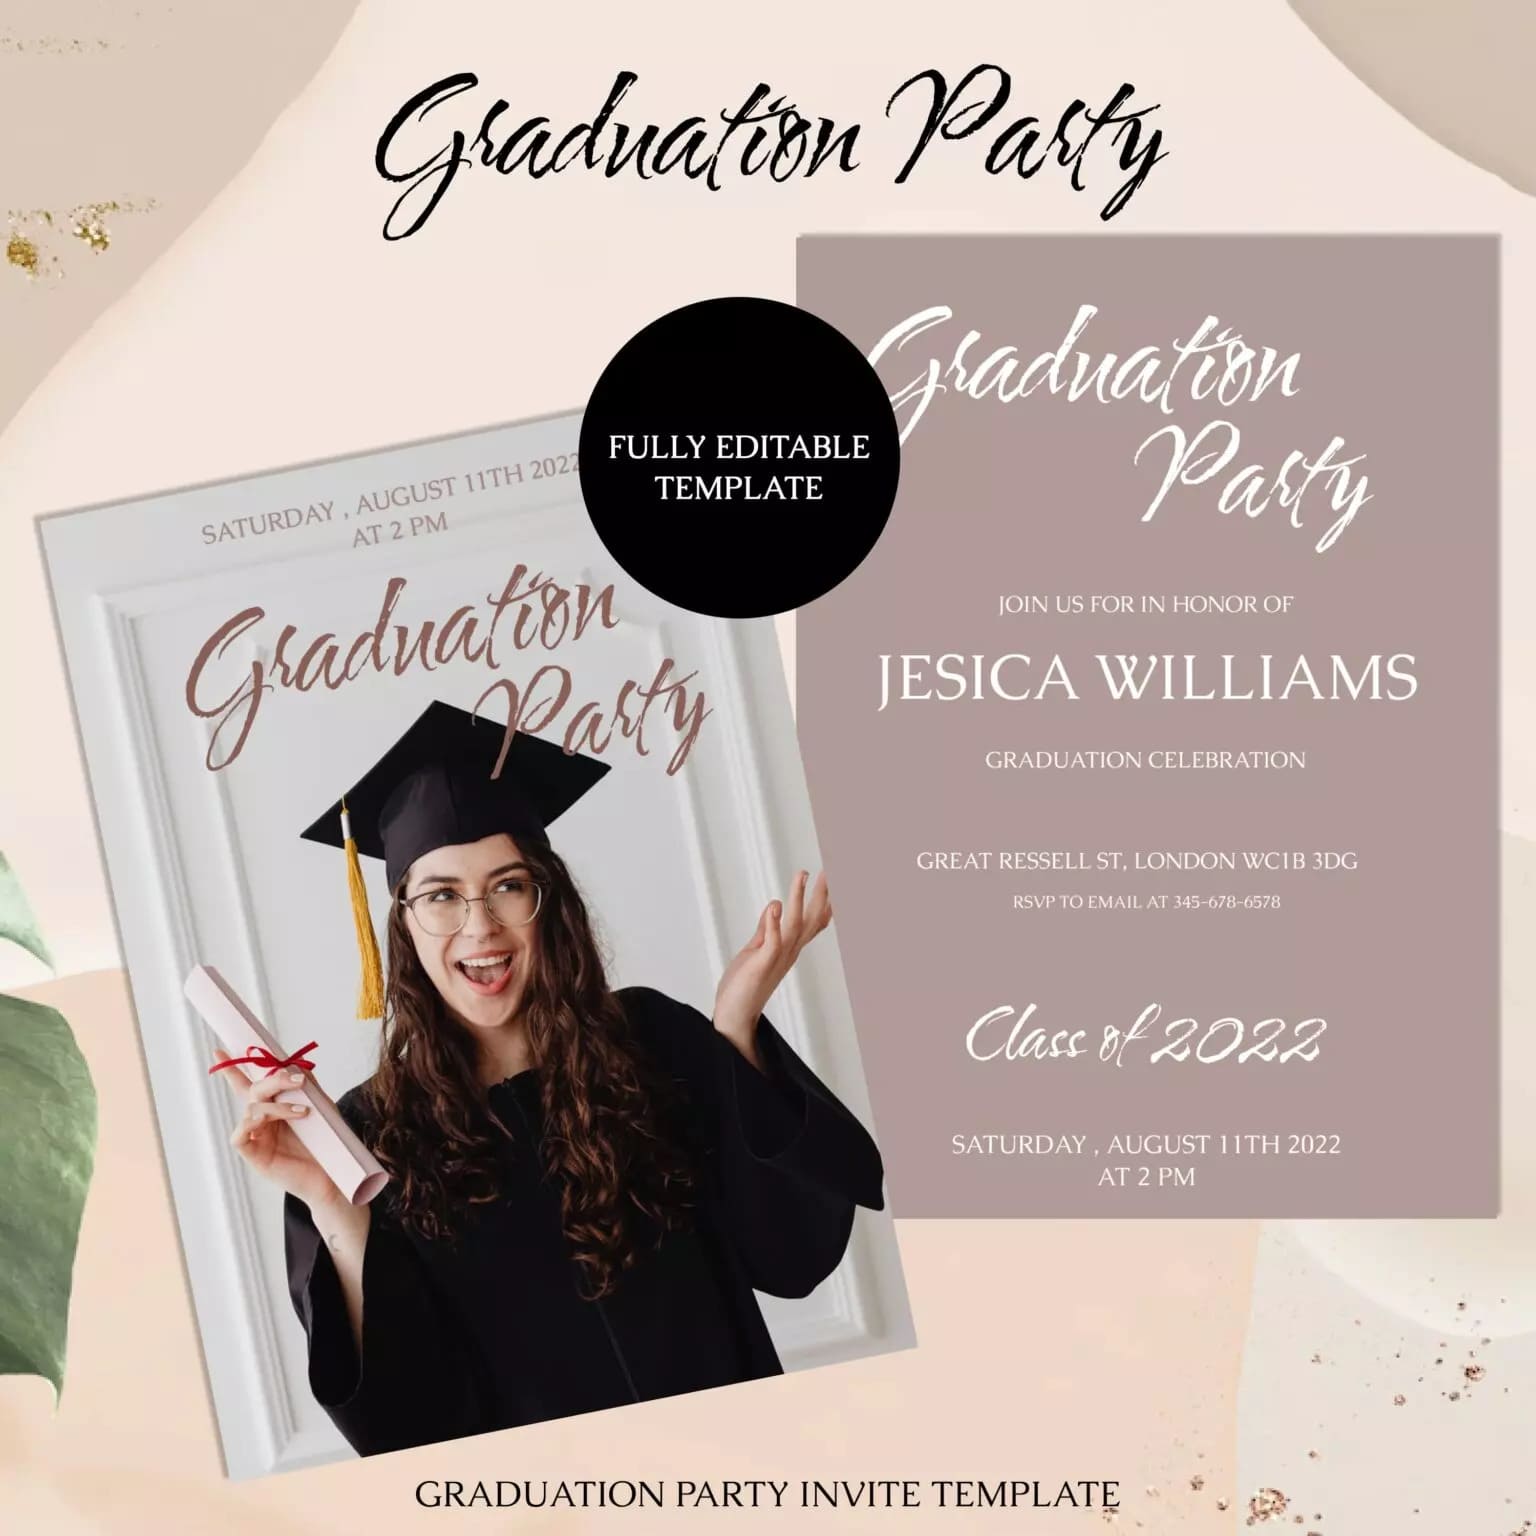 Graduation Party Invite Template Preview.